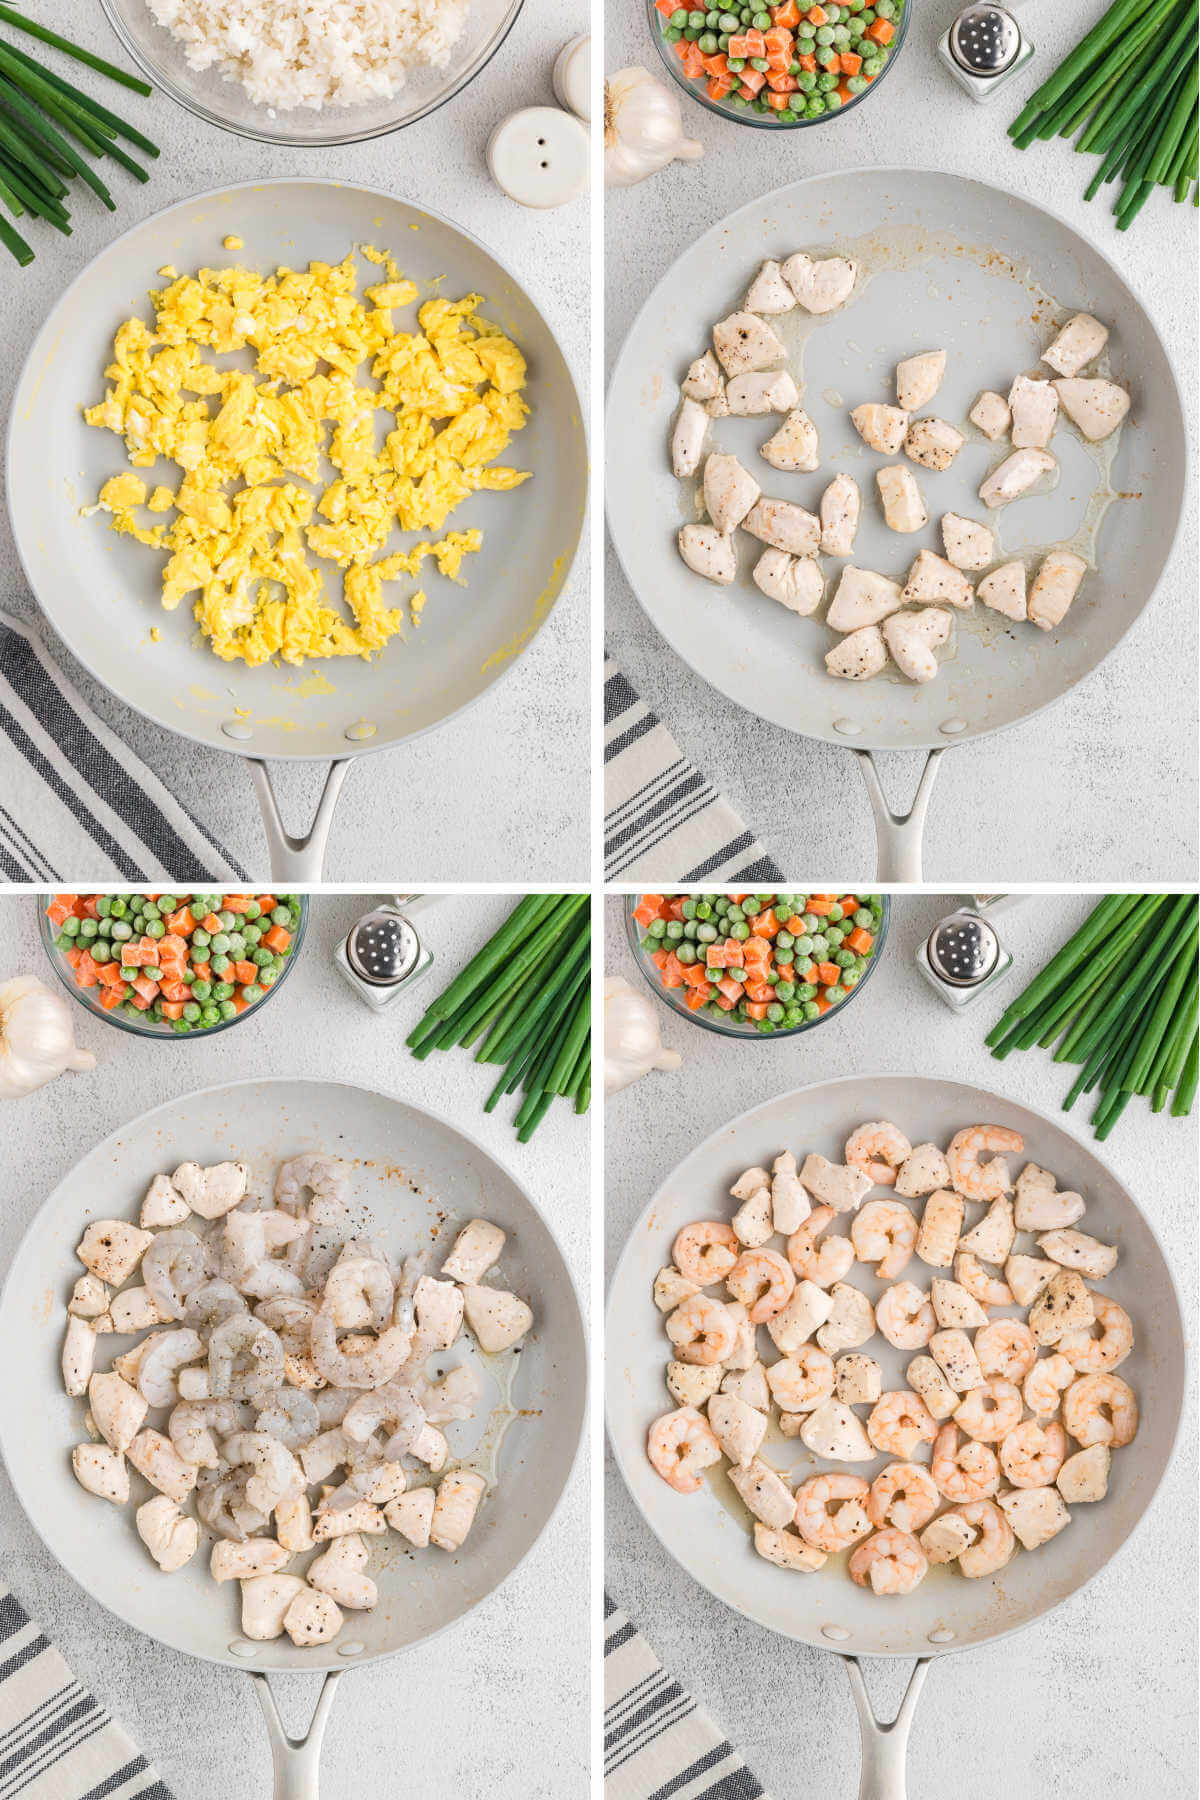 process steps for making fried rice with shrimp and chicken: scrambled eggs in skillet, shrimo and chicken sauteed in skillet.